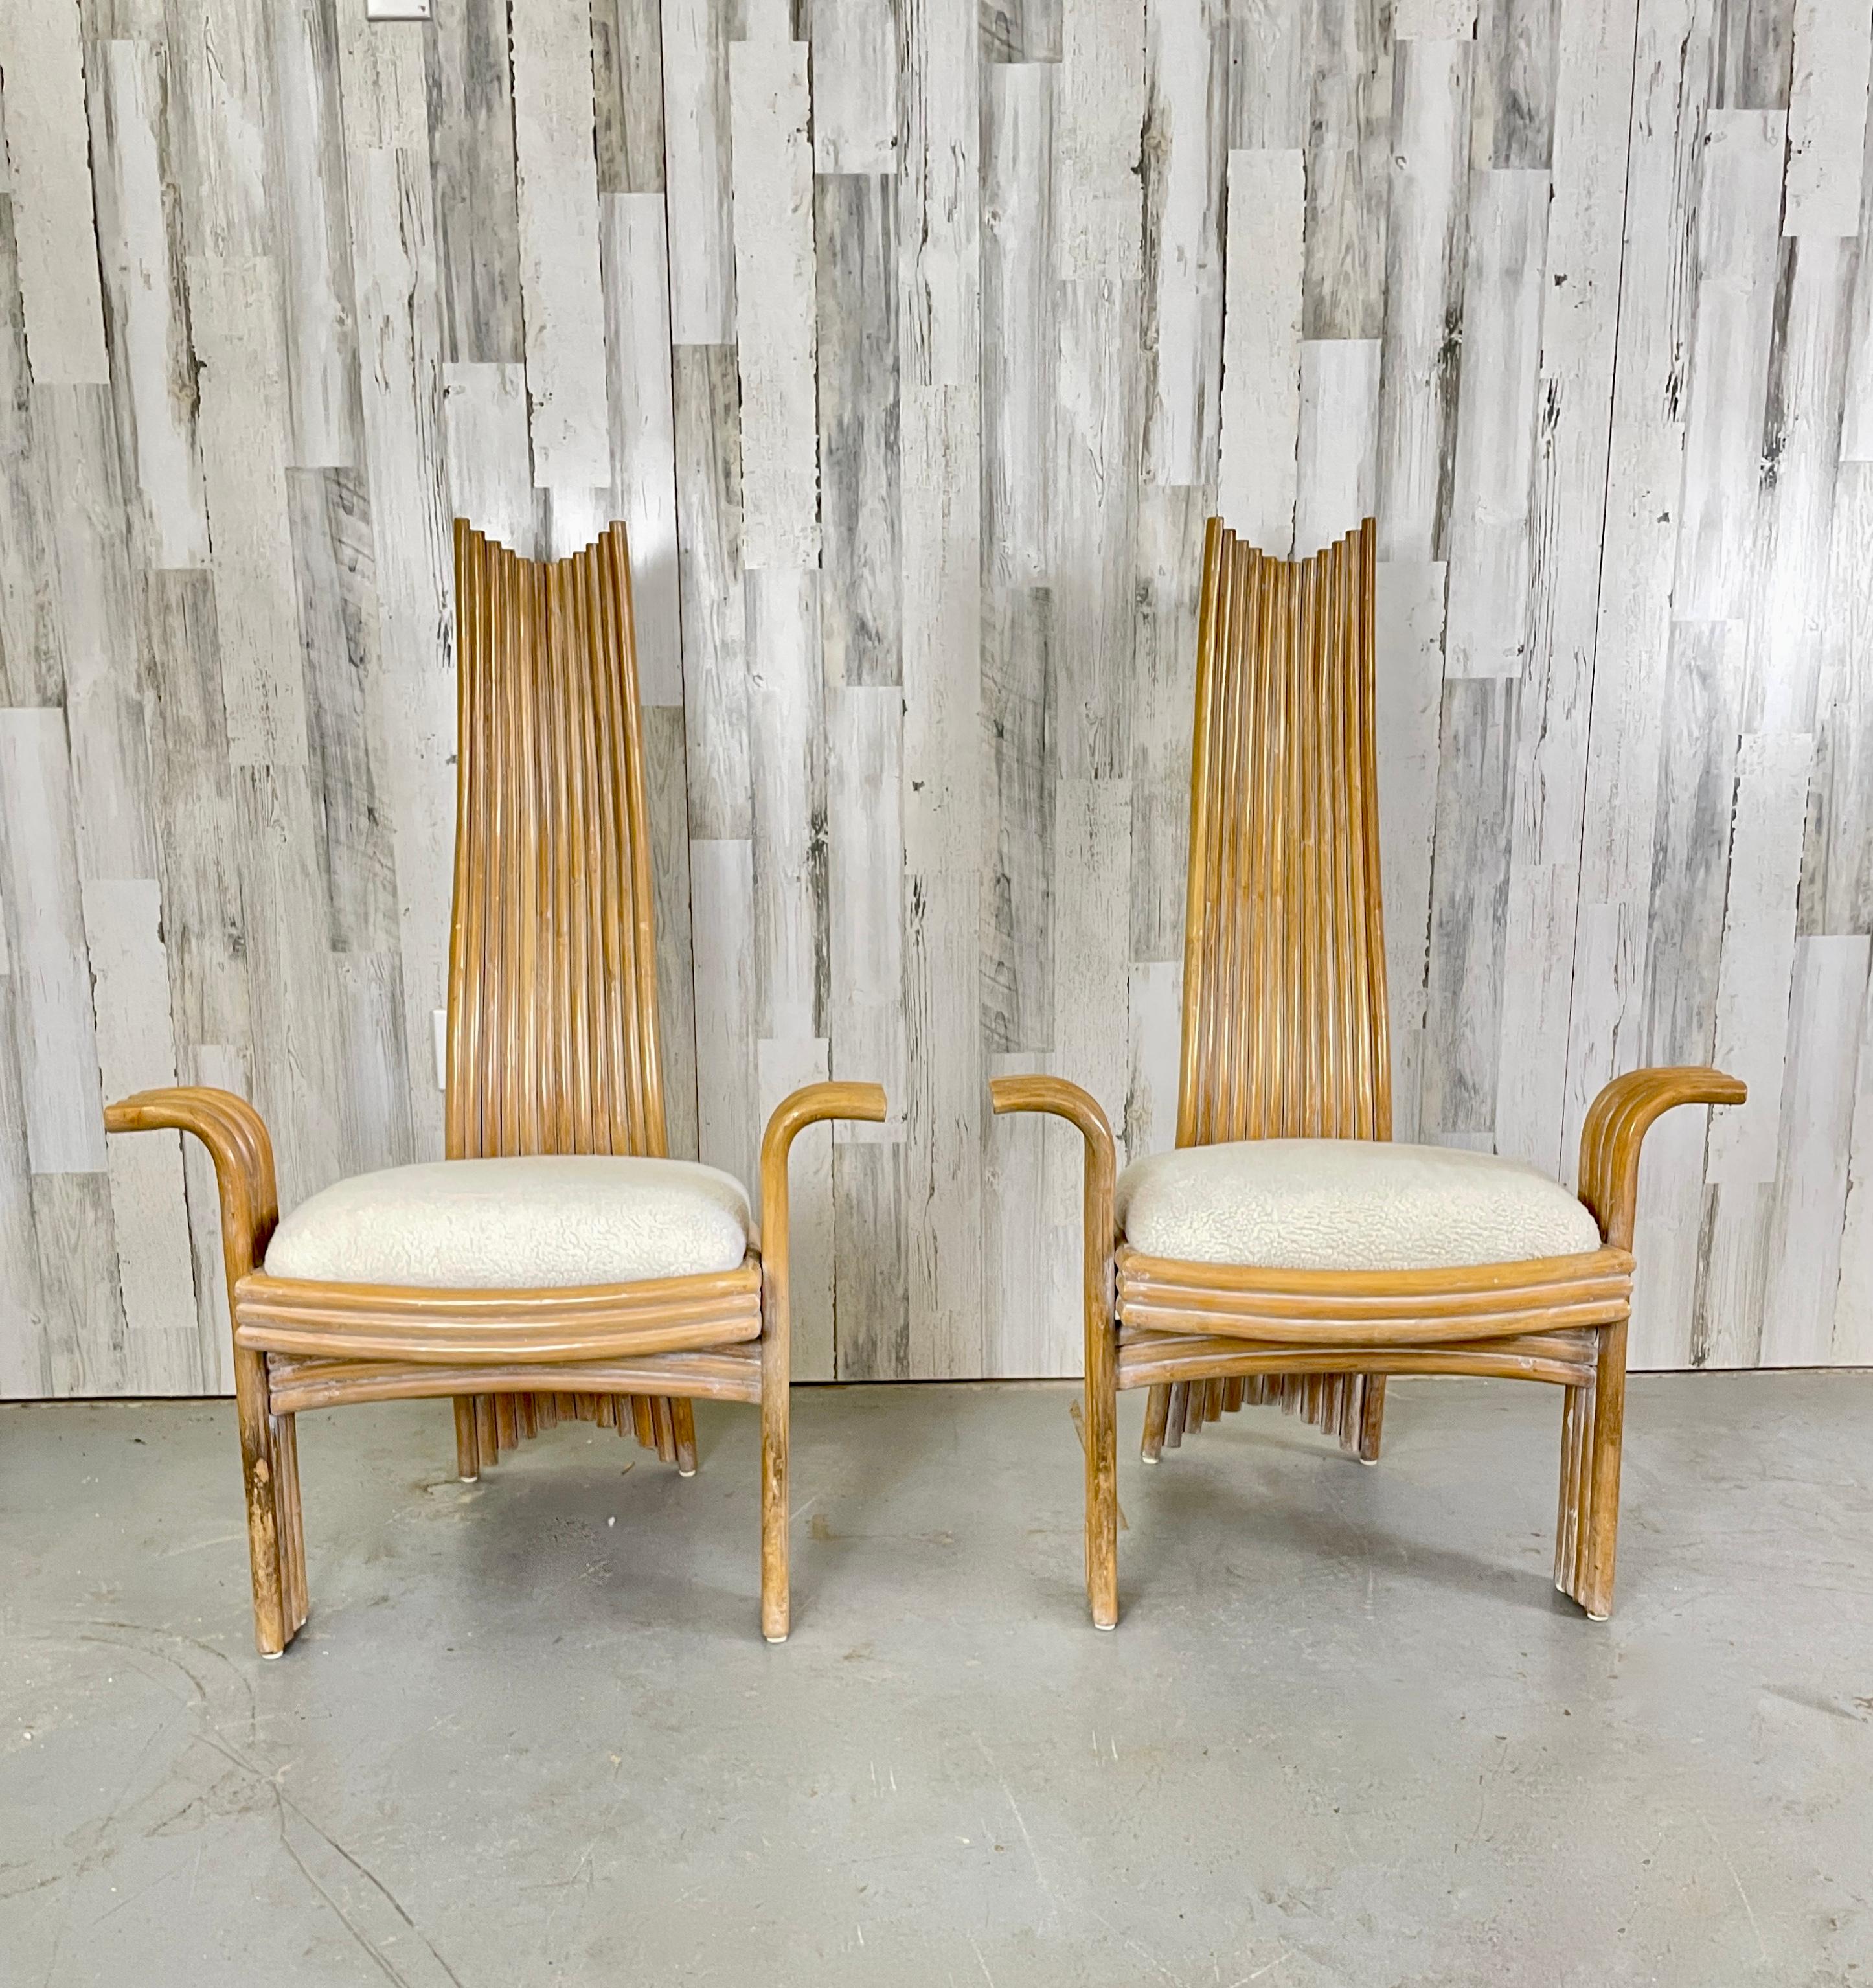 Danny Ho Fong Style Rattan Arm Chairs, A Pair For Sale 5